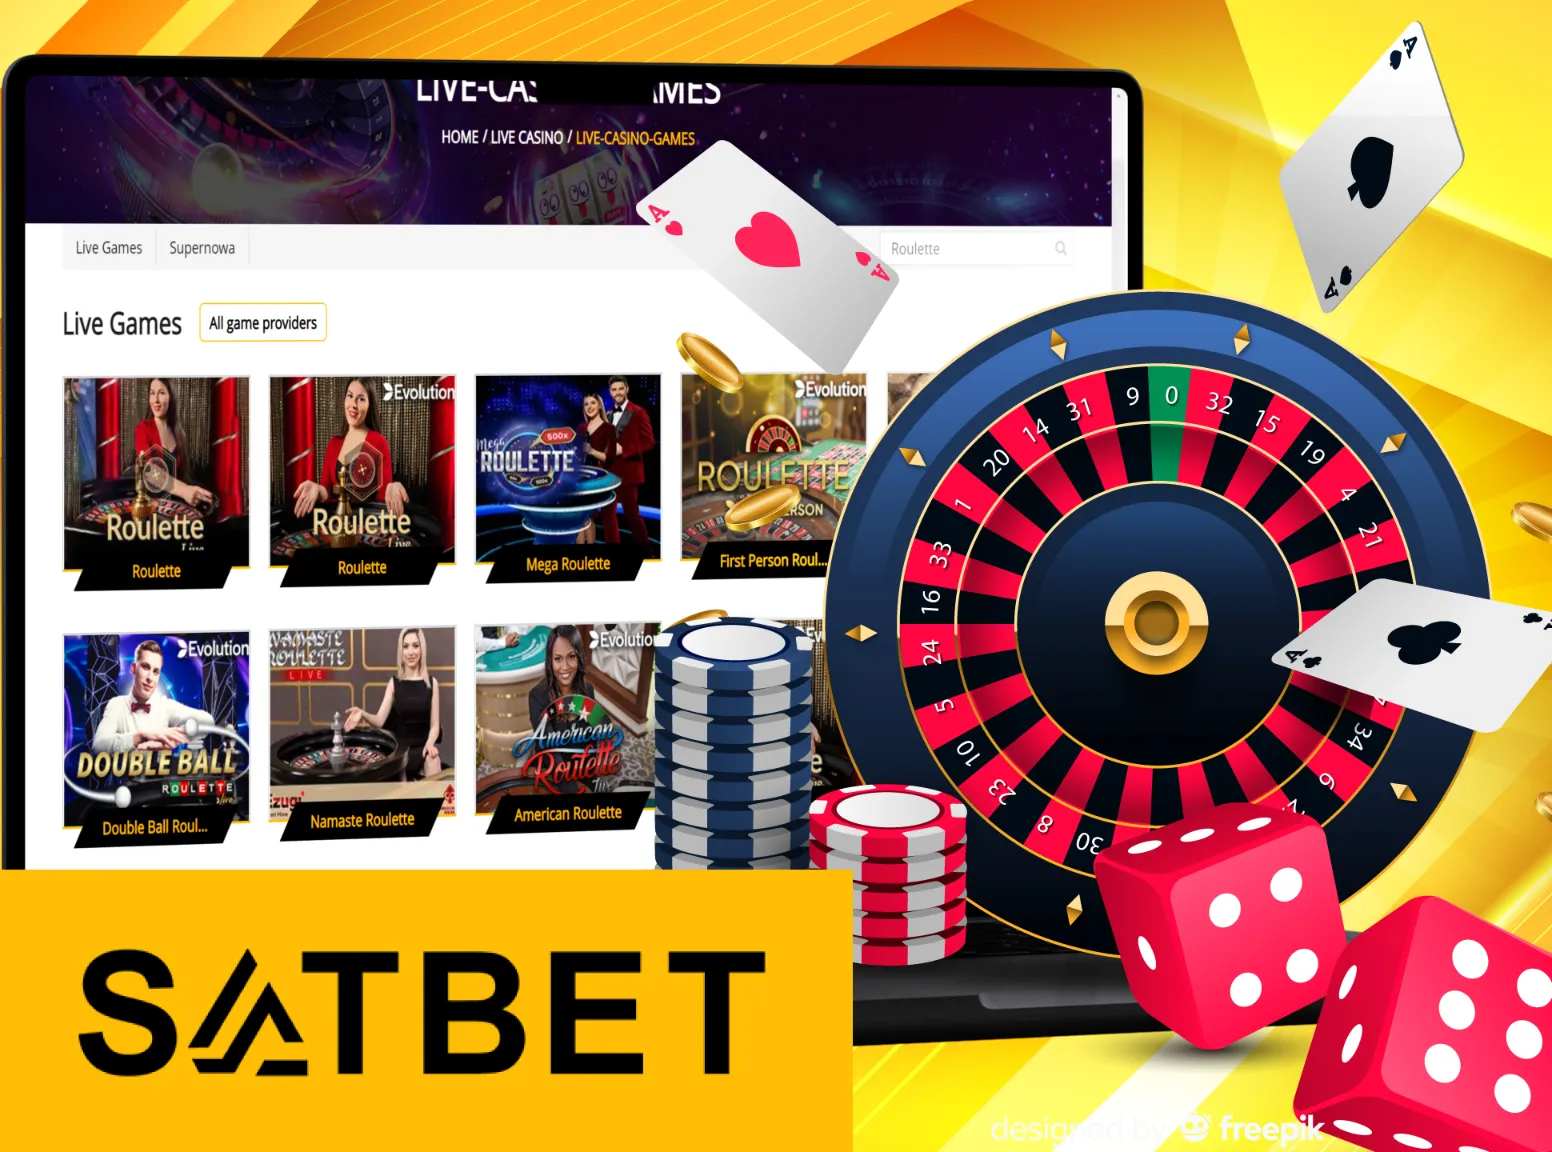 Spin roulette at Satbet and win money.